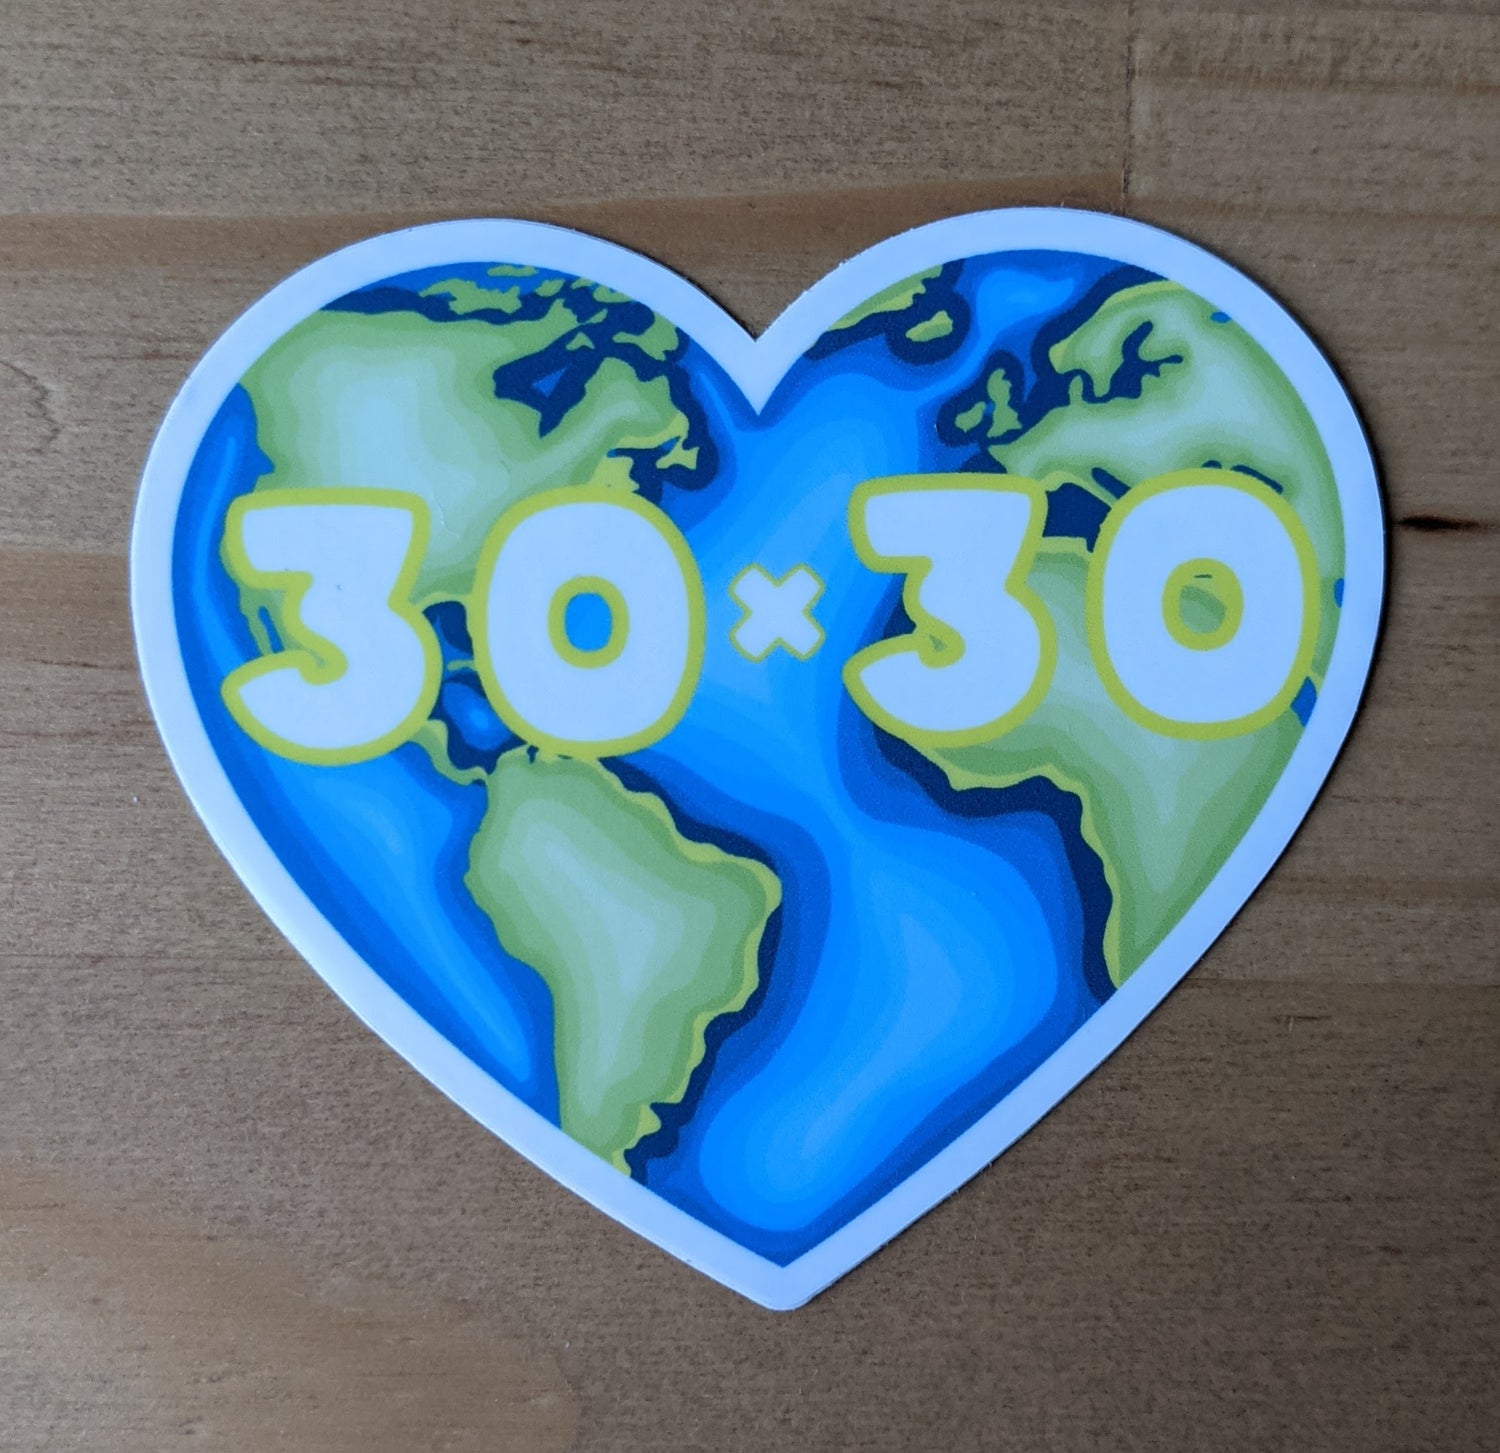 Heart shaped world sticker with 30x30 design, created by Jackie from Present